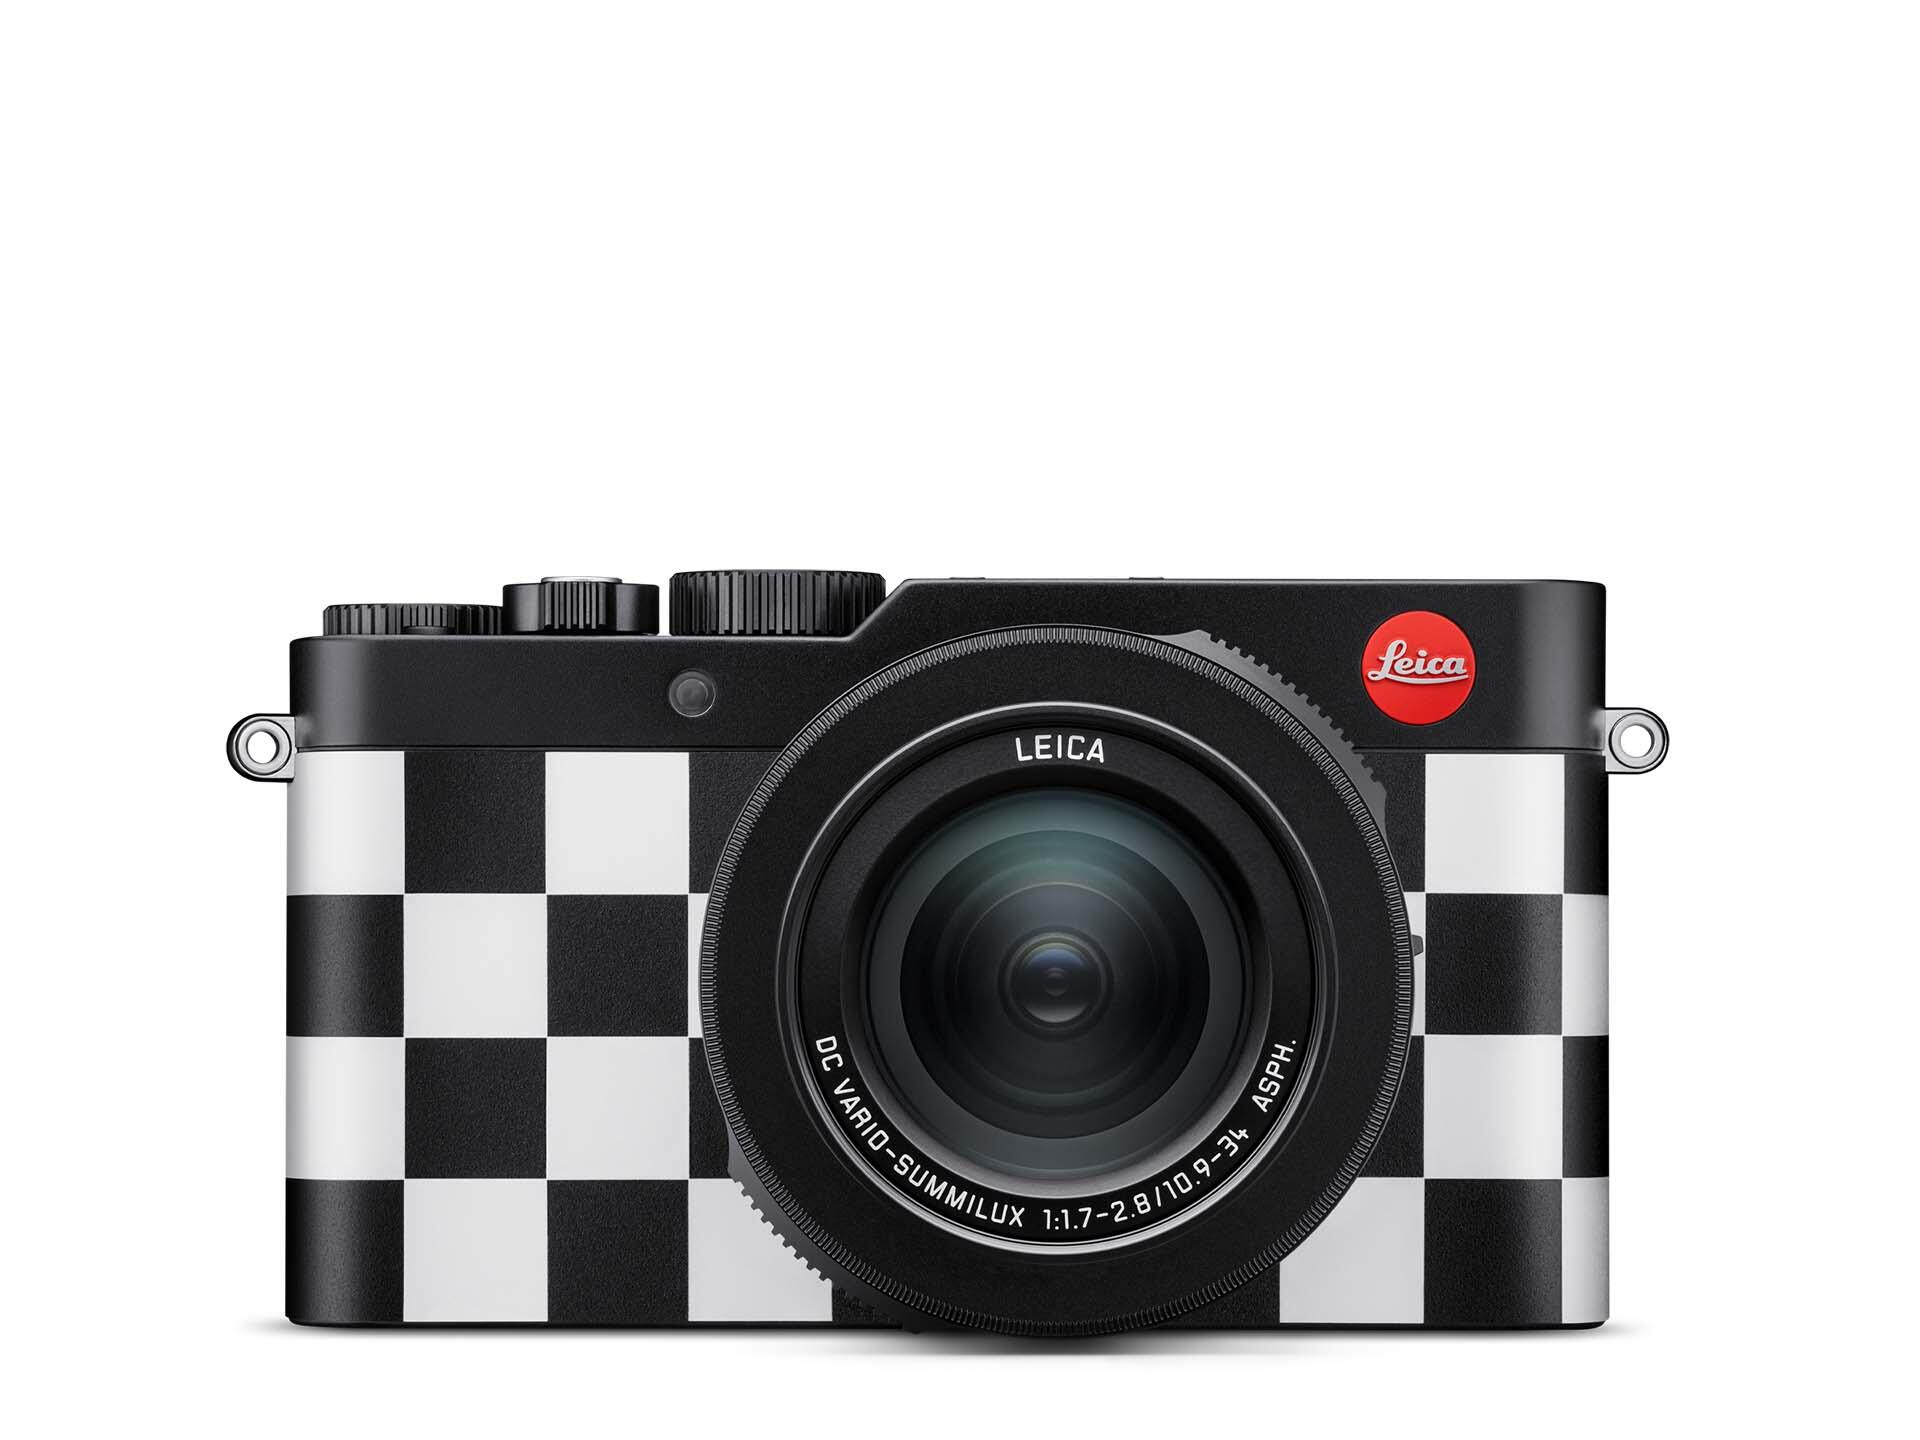 Leica D-Lux 7 Vans x Ray Barbee | Leica Camera SG